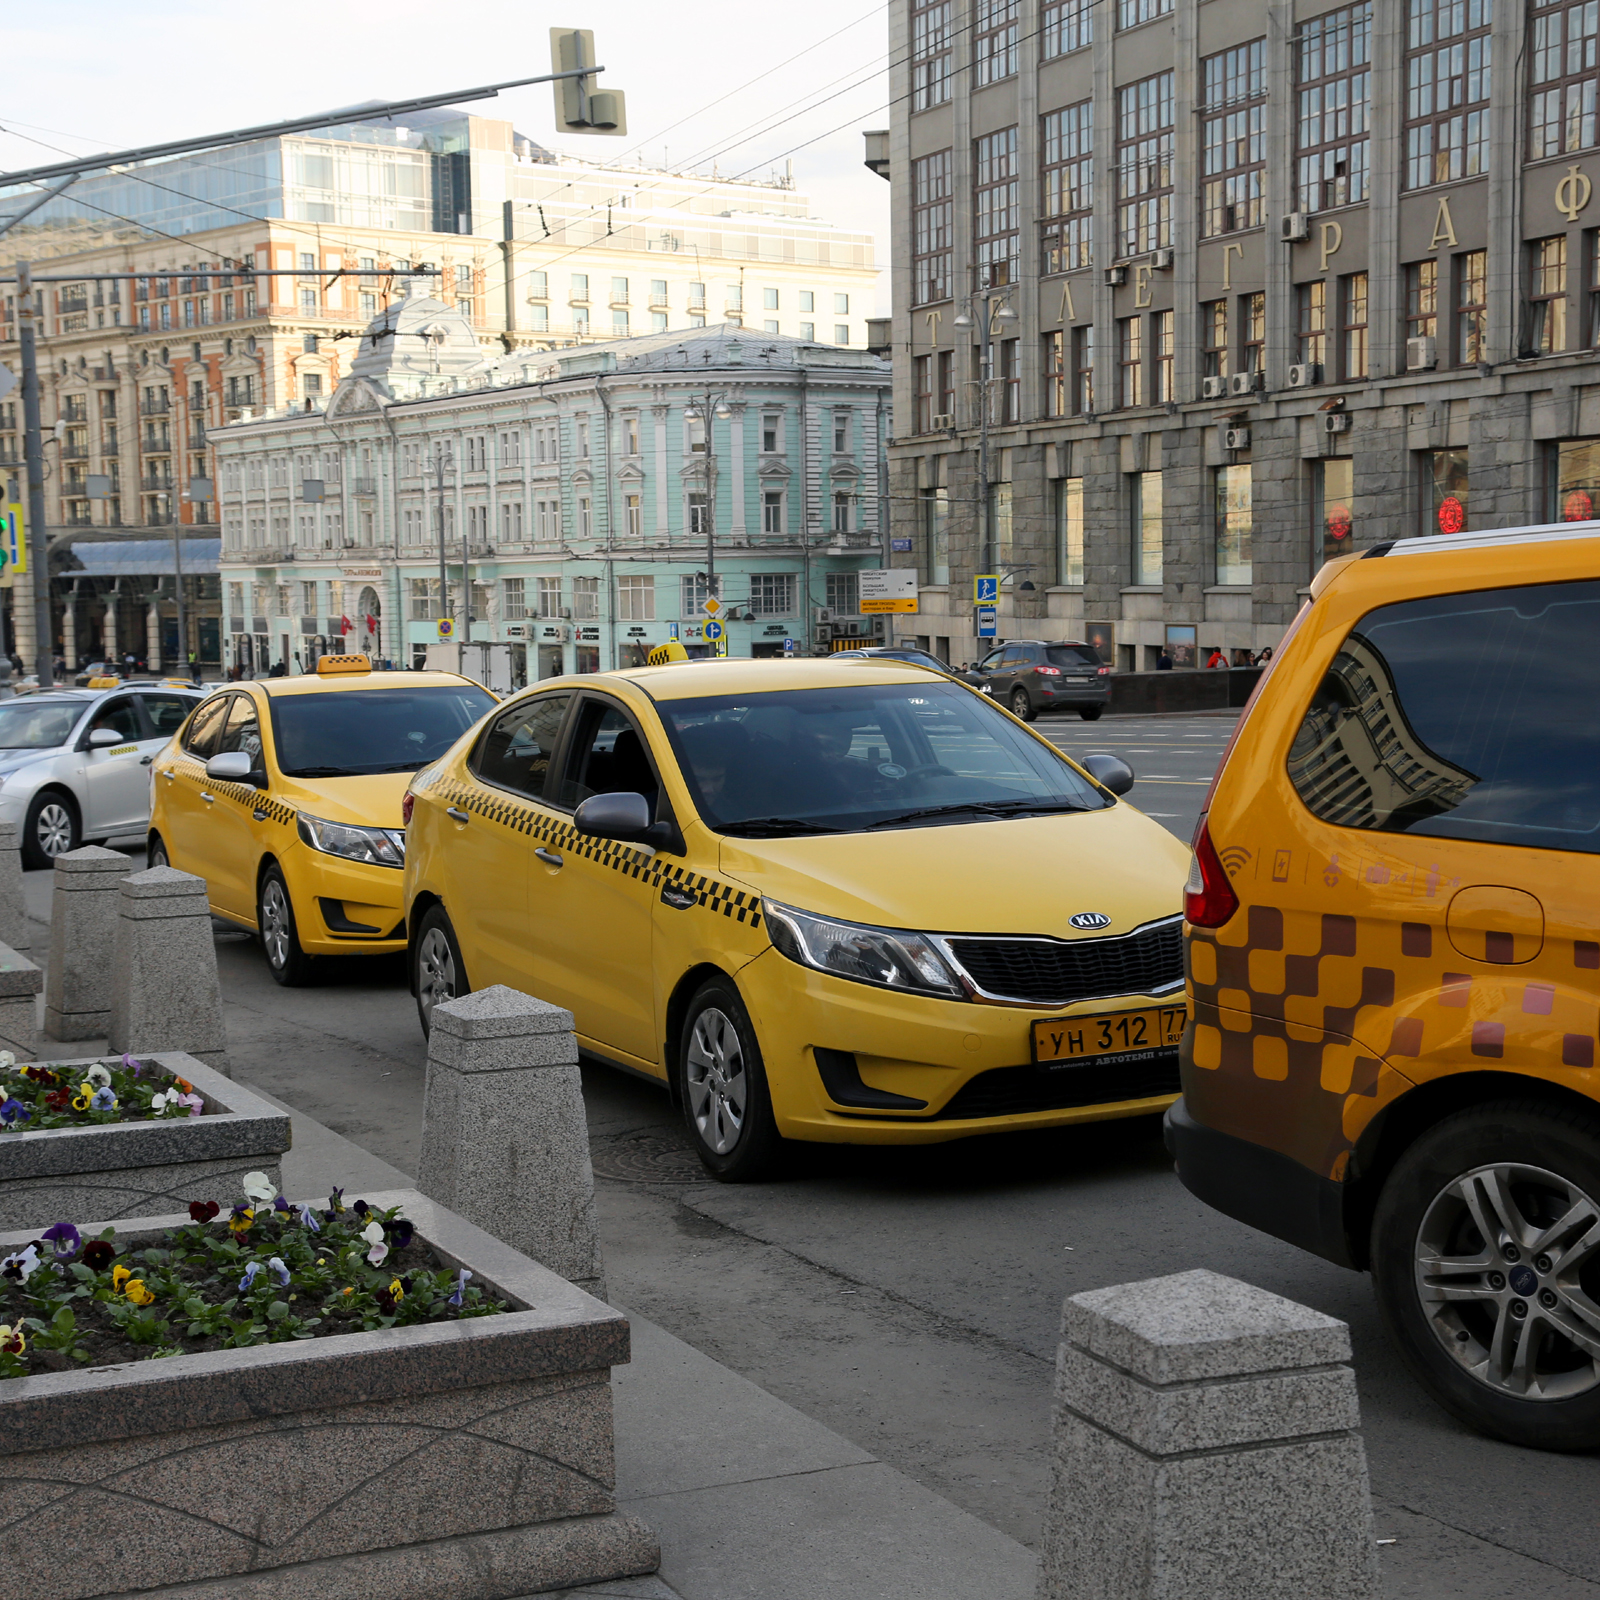 Taxis Take BCH, Stores Sell BTC in the Russian City of Rostov